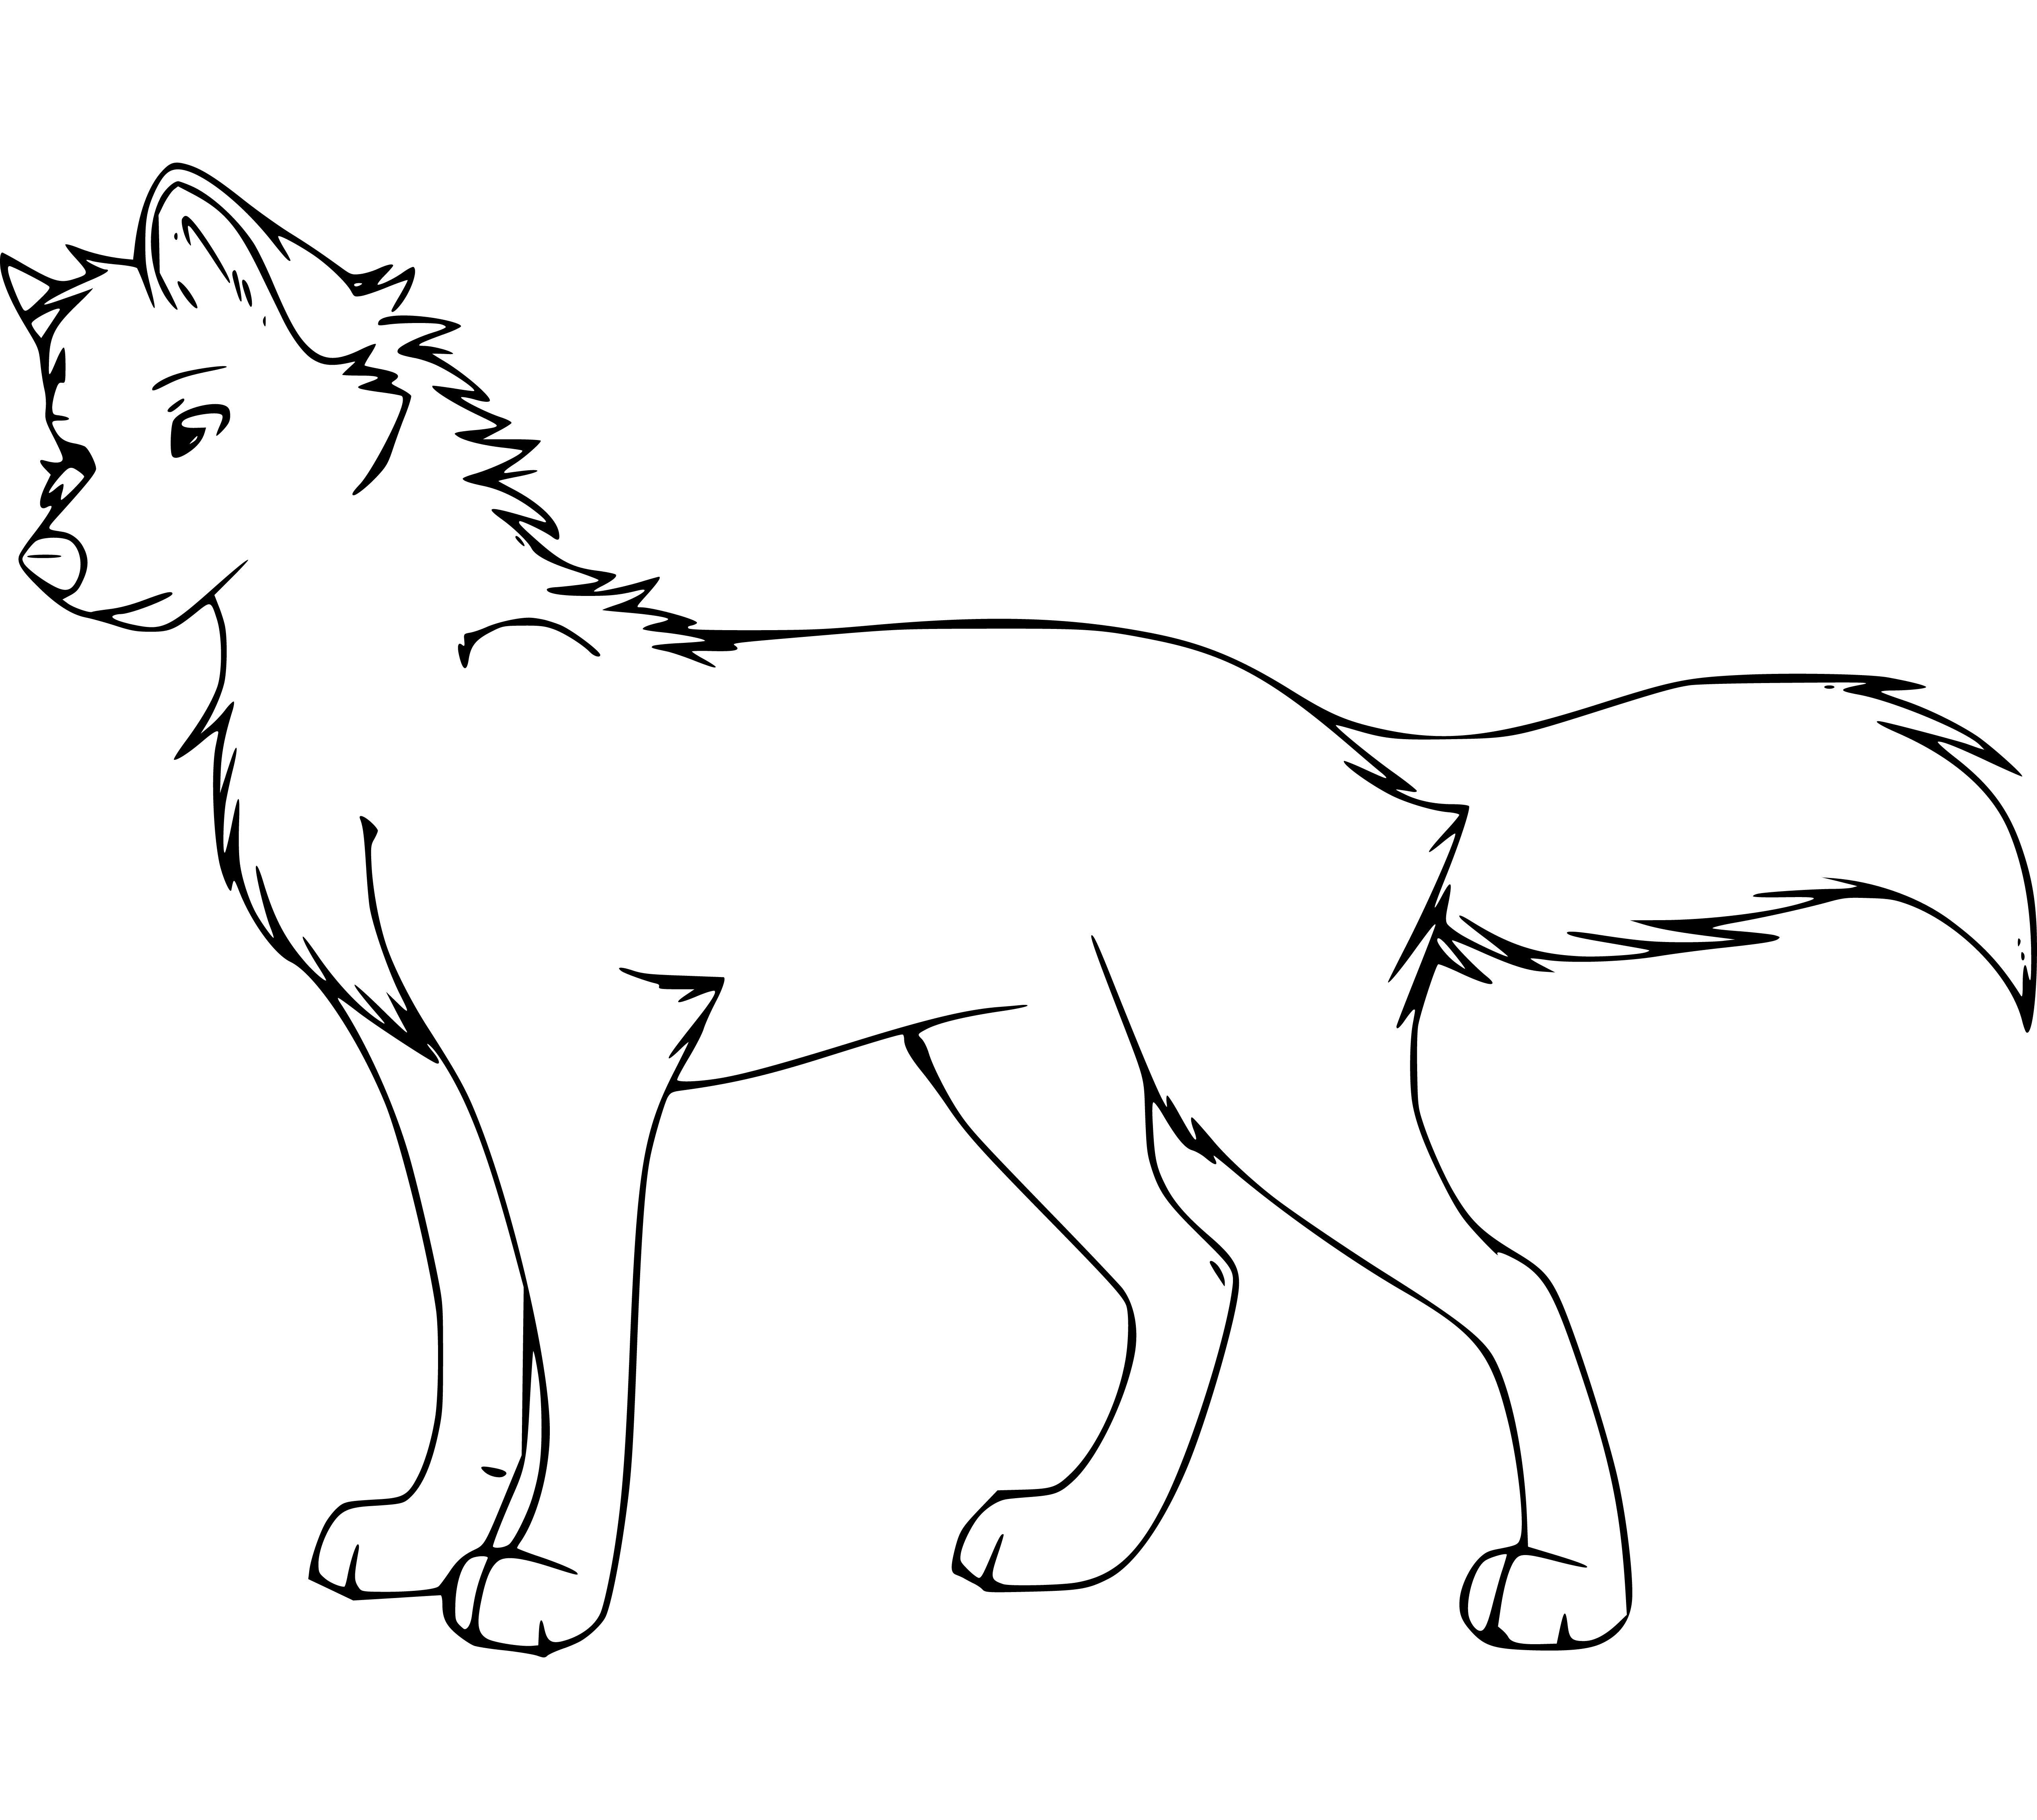 Wolf Coloring Page easy and simple for Kids to Print - SheetalColor.com